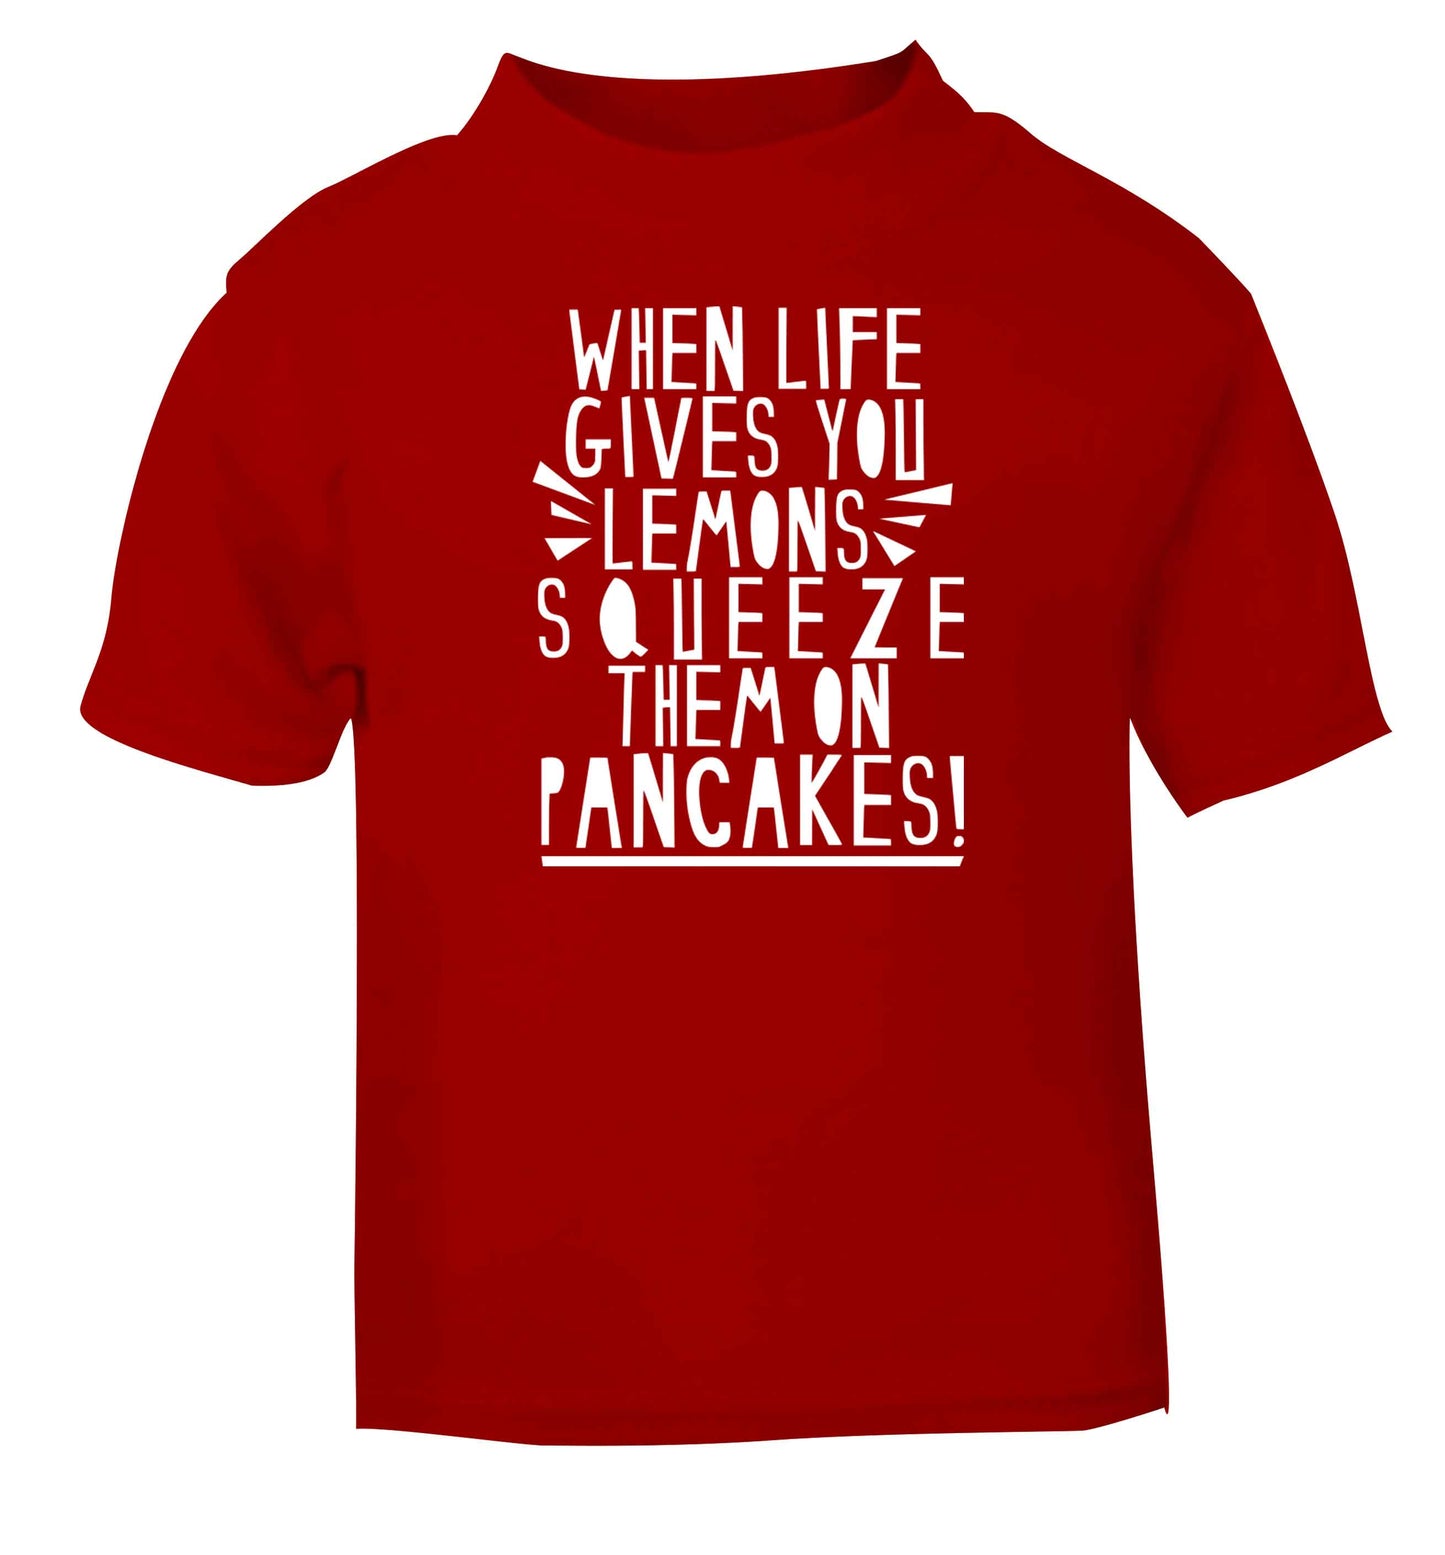 When life gives you lemons squeeze them on pancakes! red baby toddler Tshirt 2 Years